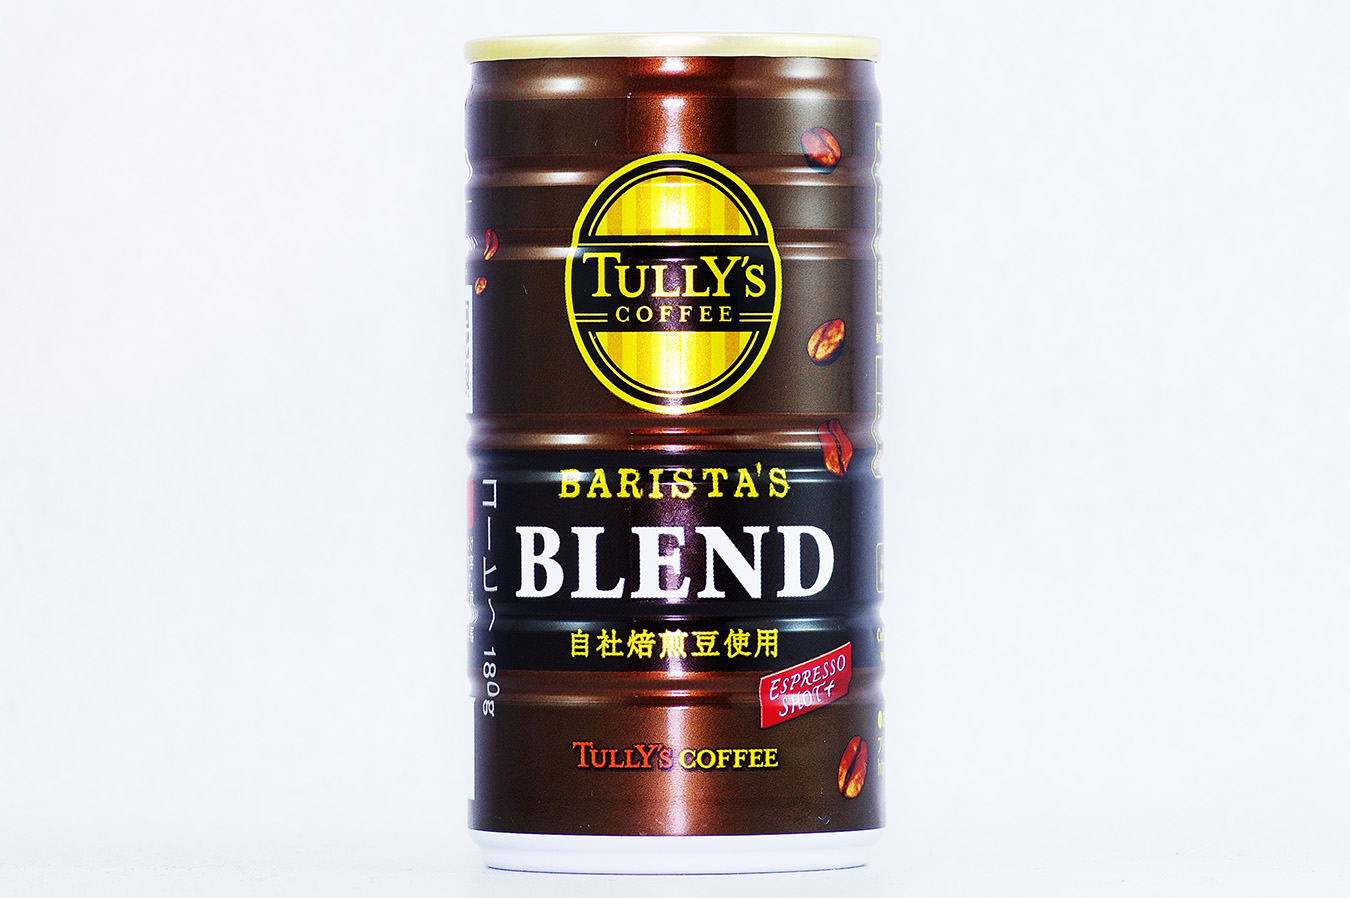 TULLY'S COFFEE BARISTA'S BLEND